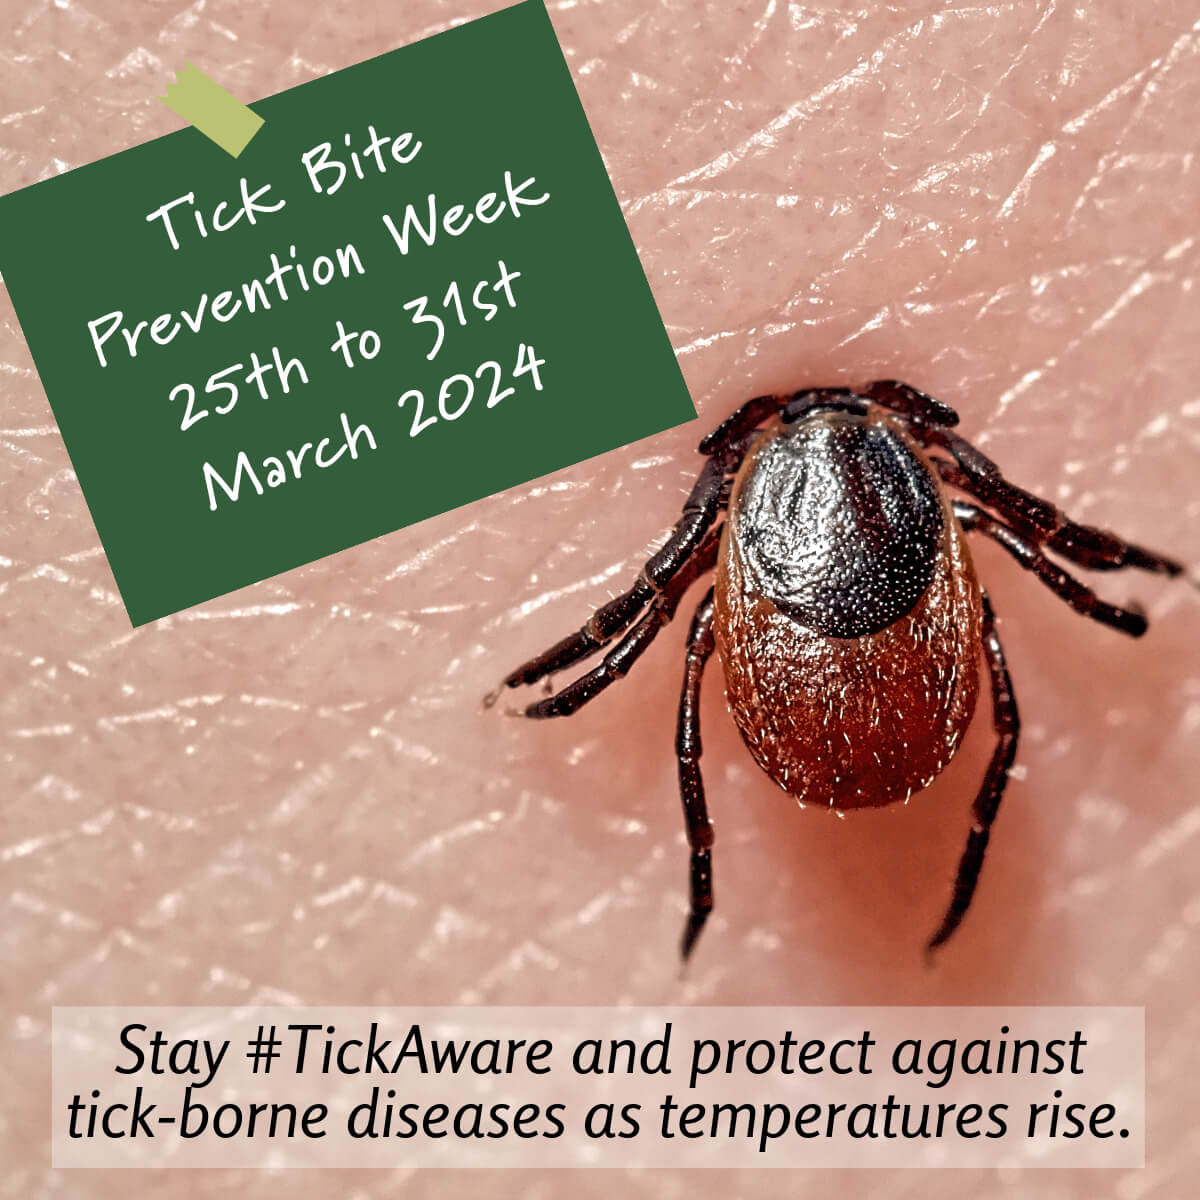 Stay safe this Tick Bite Prevention Week! As the weather heats up, so do tick dangers. Arm yourself with knowledge and protection to keep you and your loved ones tick-free. #TickAware #PreventionIsKey  #TickBitePreventionWeek #TickDangers #StaySafe #OutdoorSafety